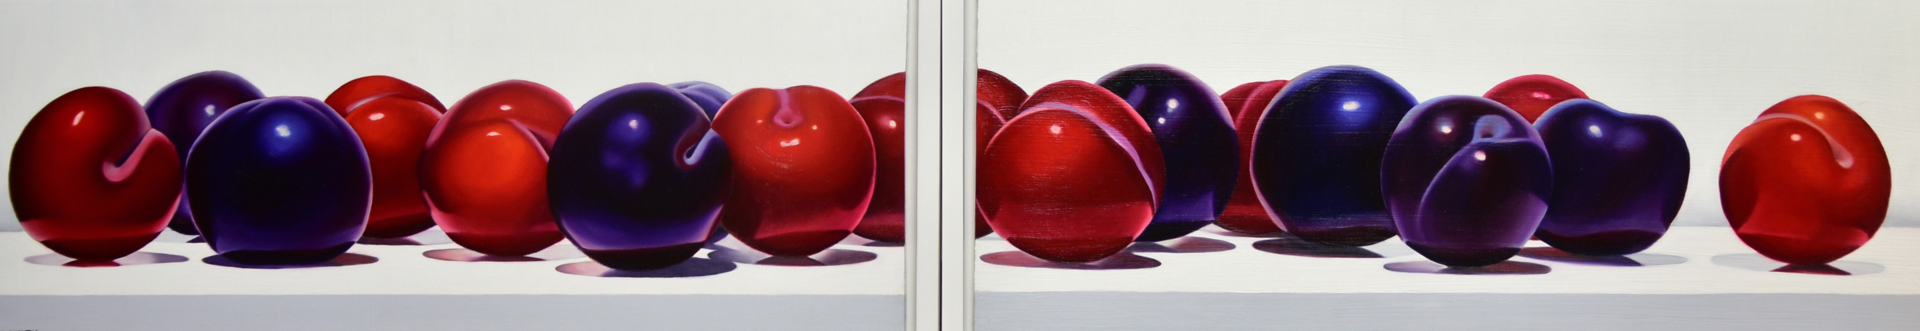 17 Plums (Diptych) by Suzy Smith